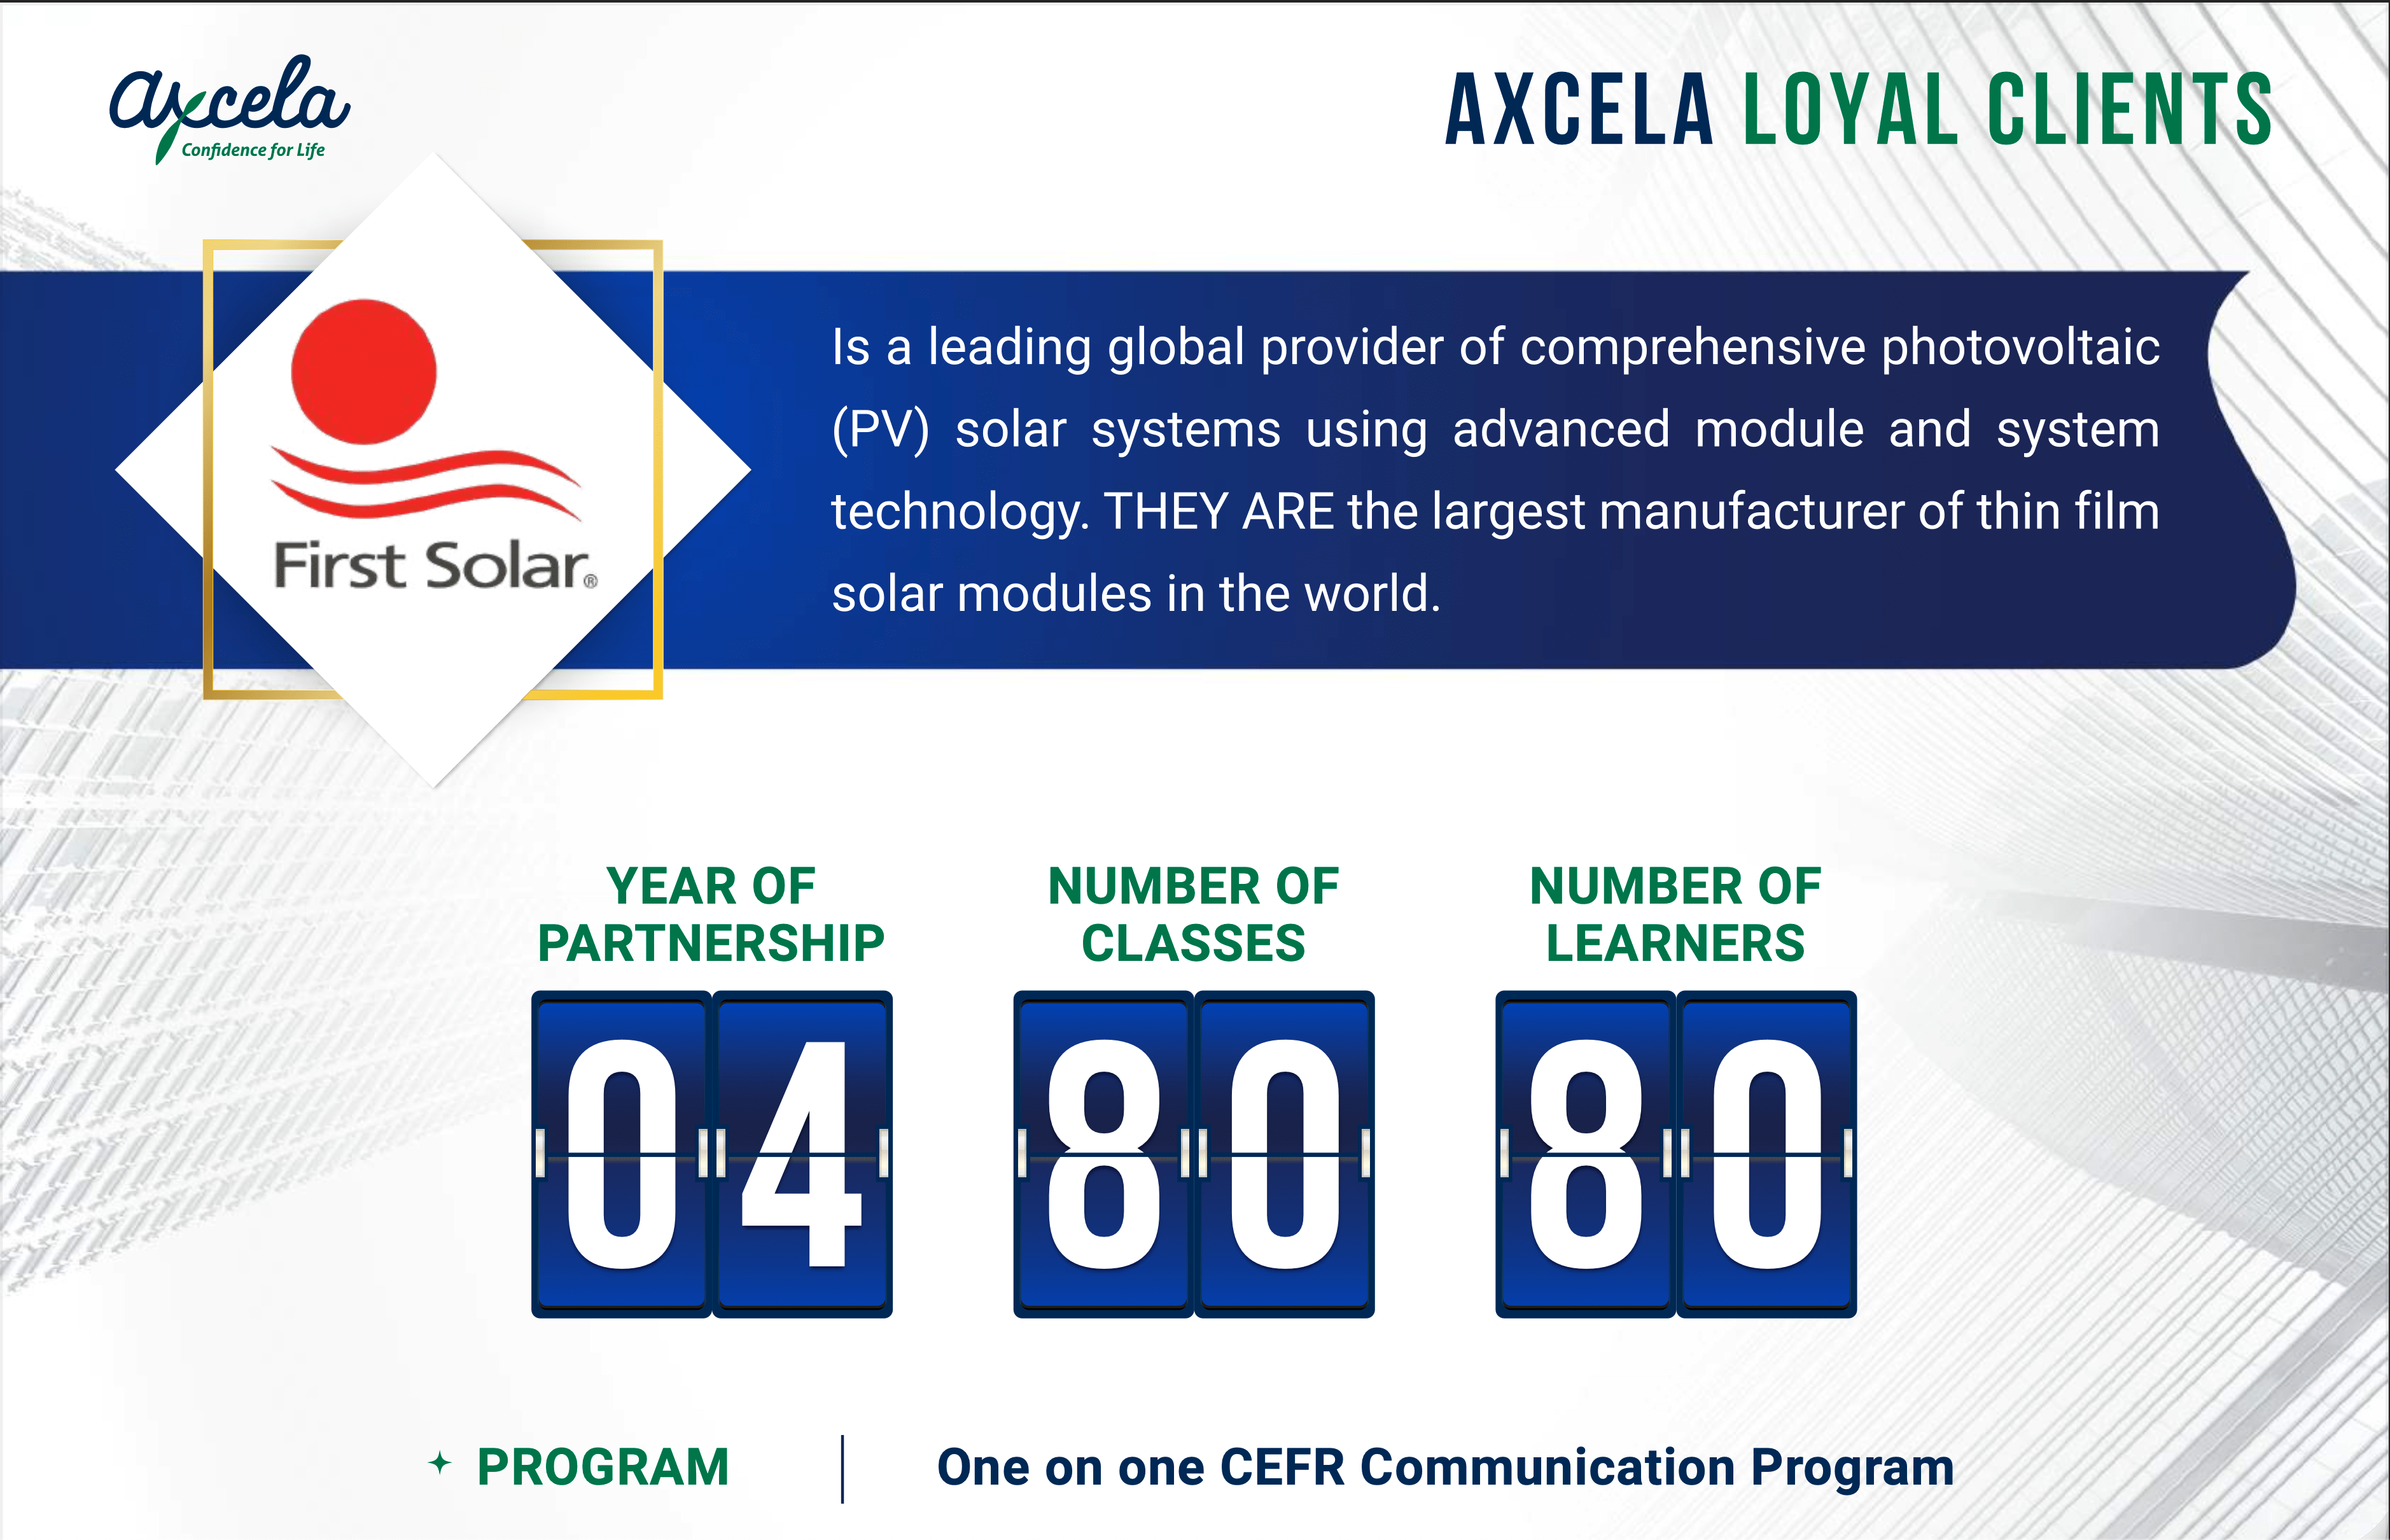 Continuous partner of Axcela for 04 years